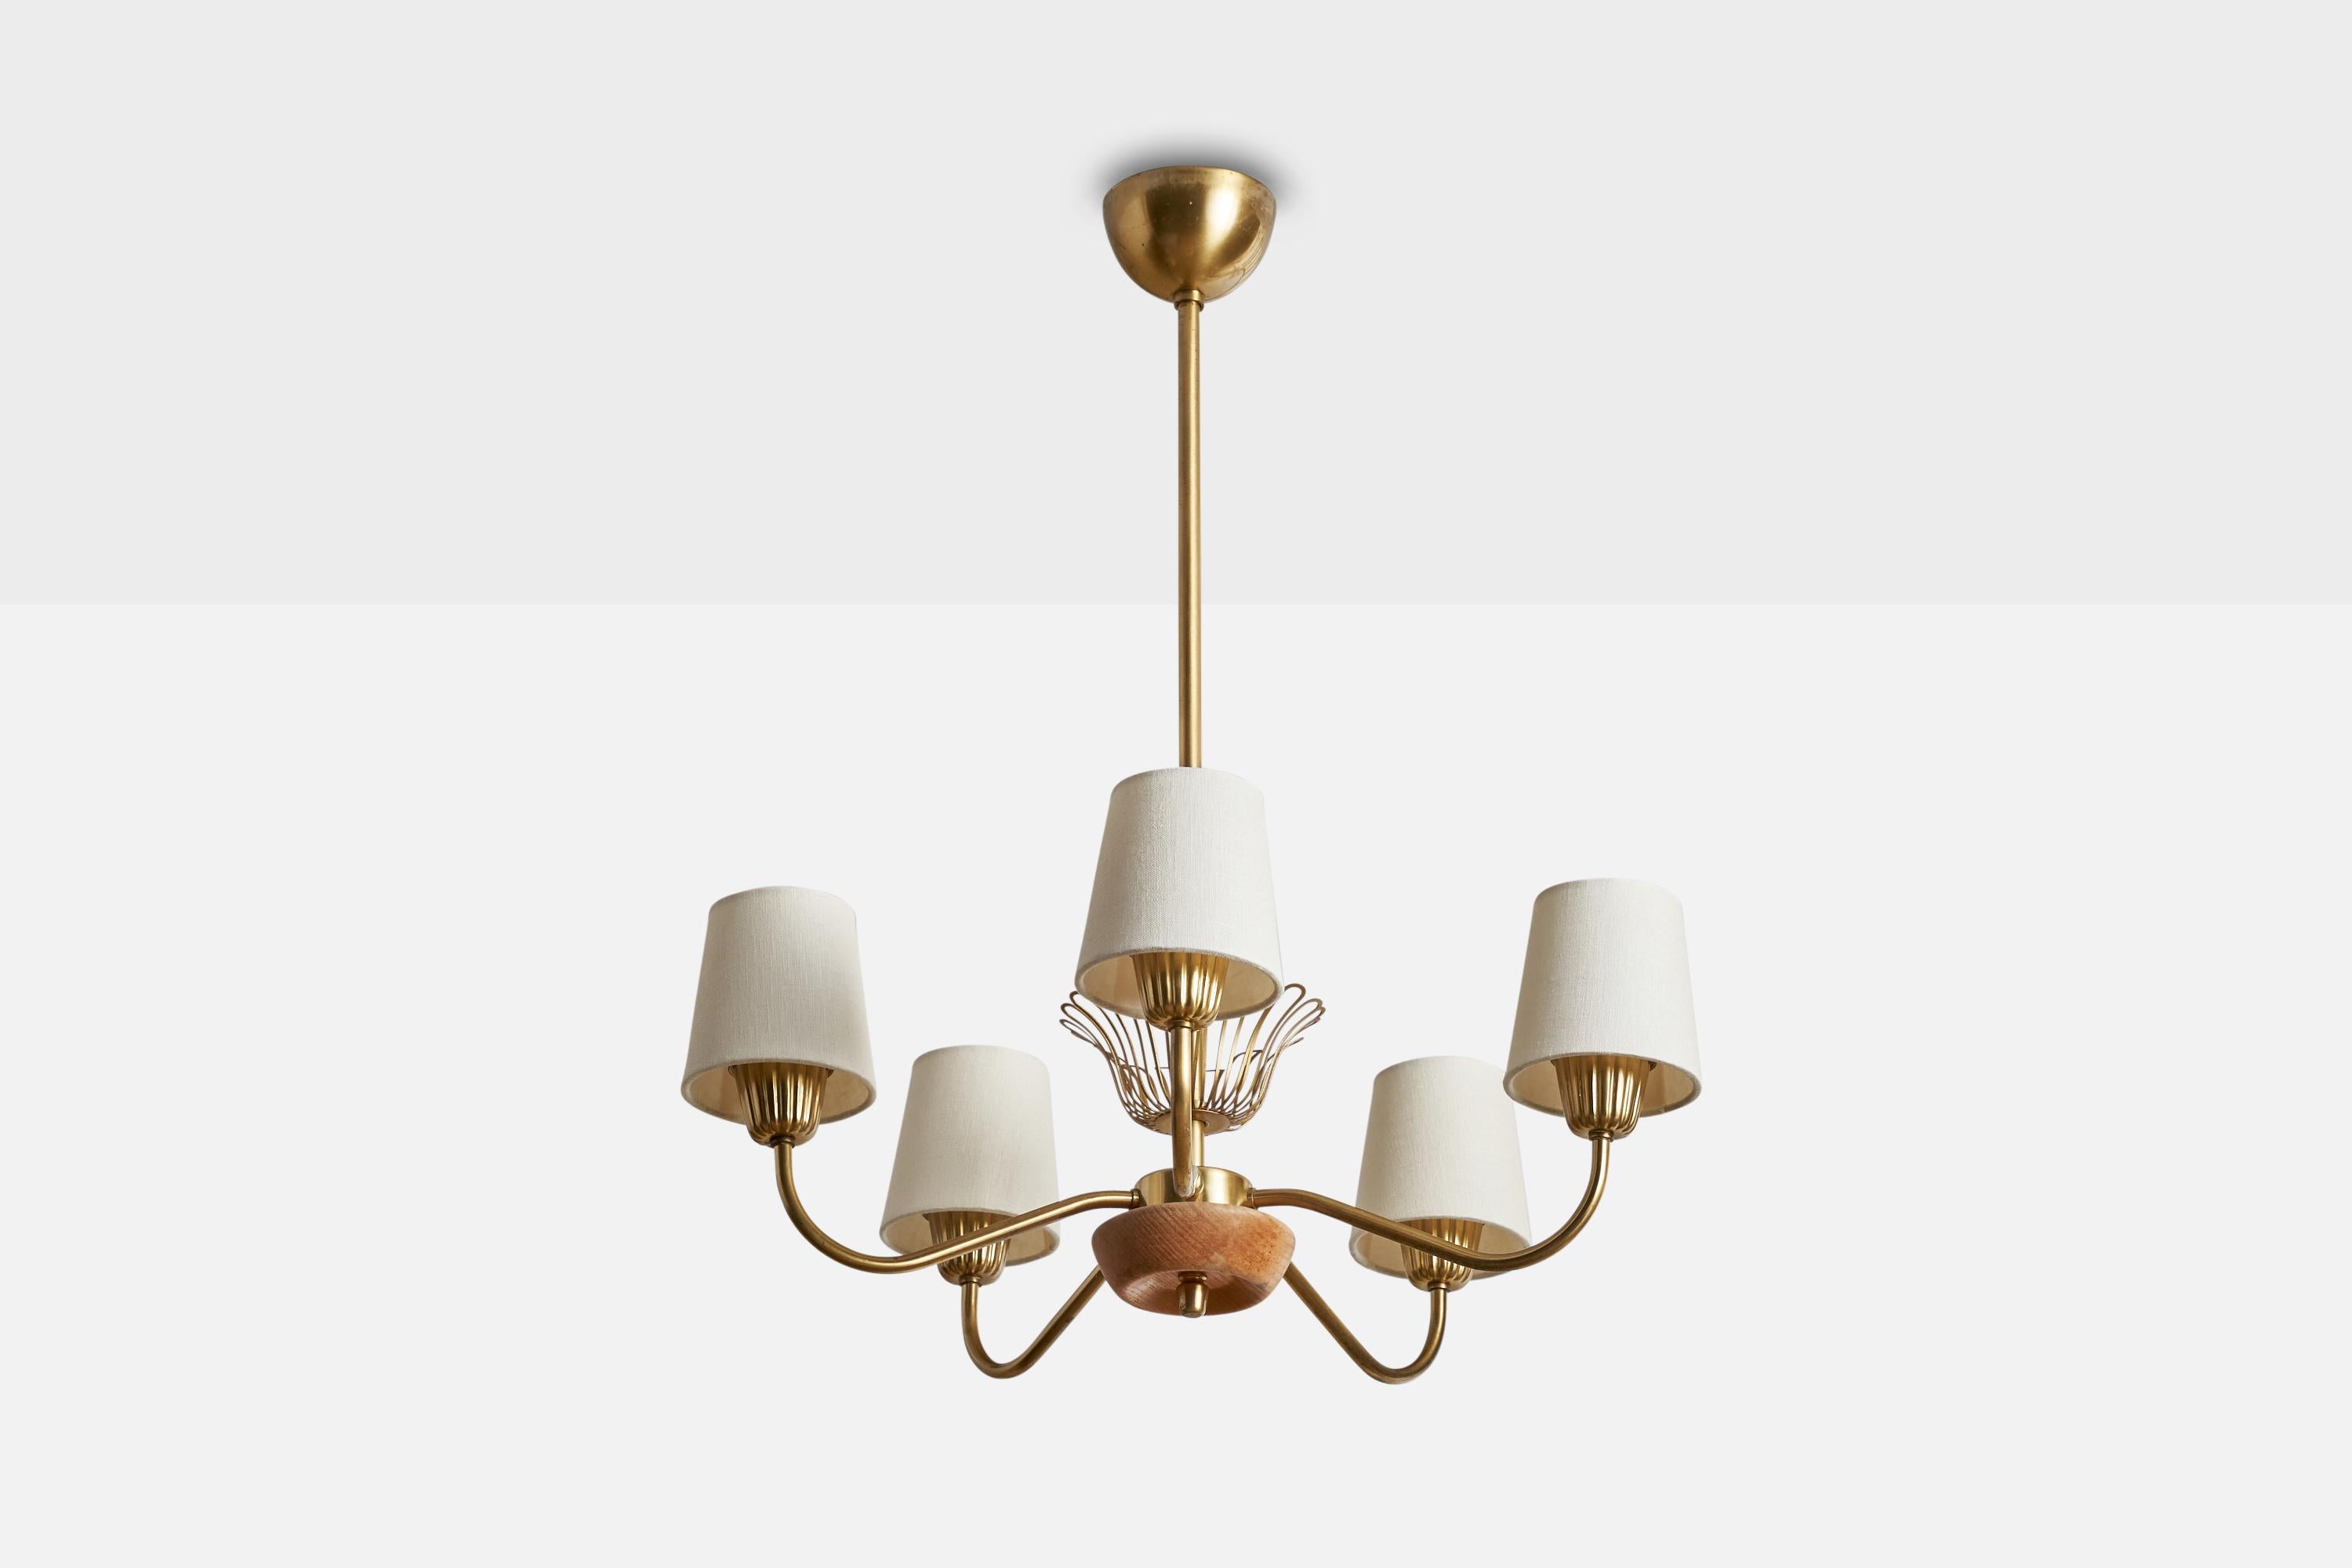 A brass, oak and white fabric chandelier designed and produced in Sweden, 1940s.

Dimensions of canopy (inches): 2.5”  H x 3.5”  Diameter
Socket takes standard E-26 bulbs. 5 sockets.There is no maximum wattage stated on the fixture. All lighting